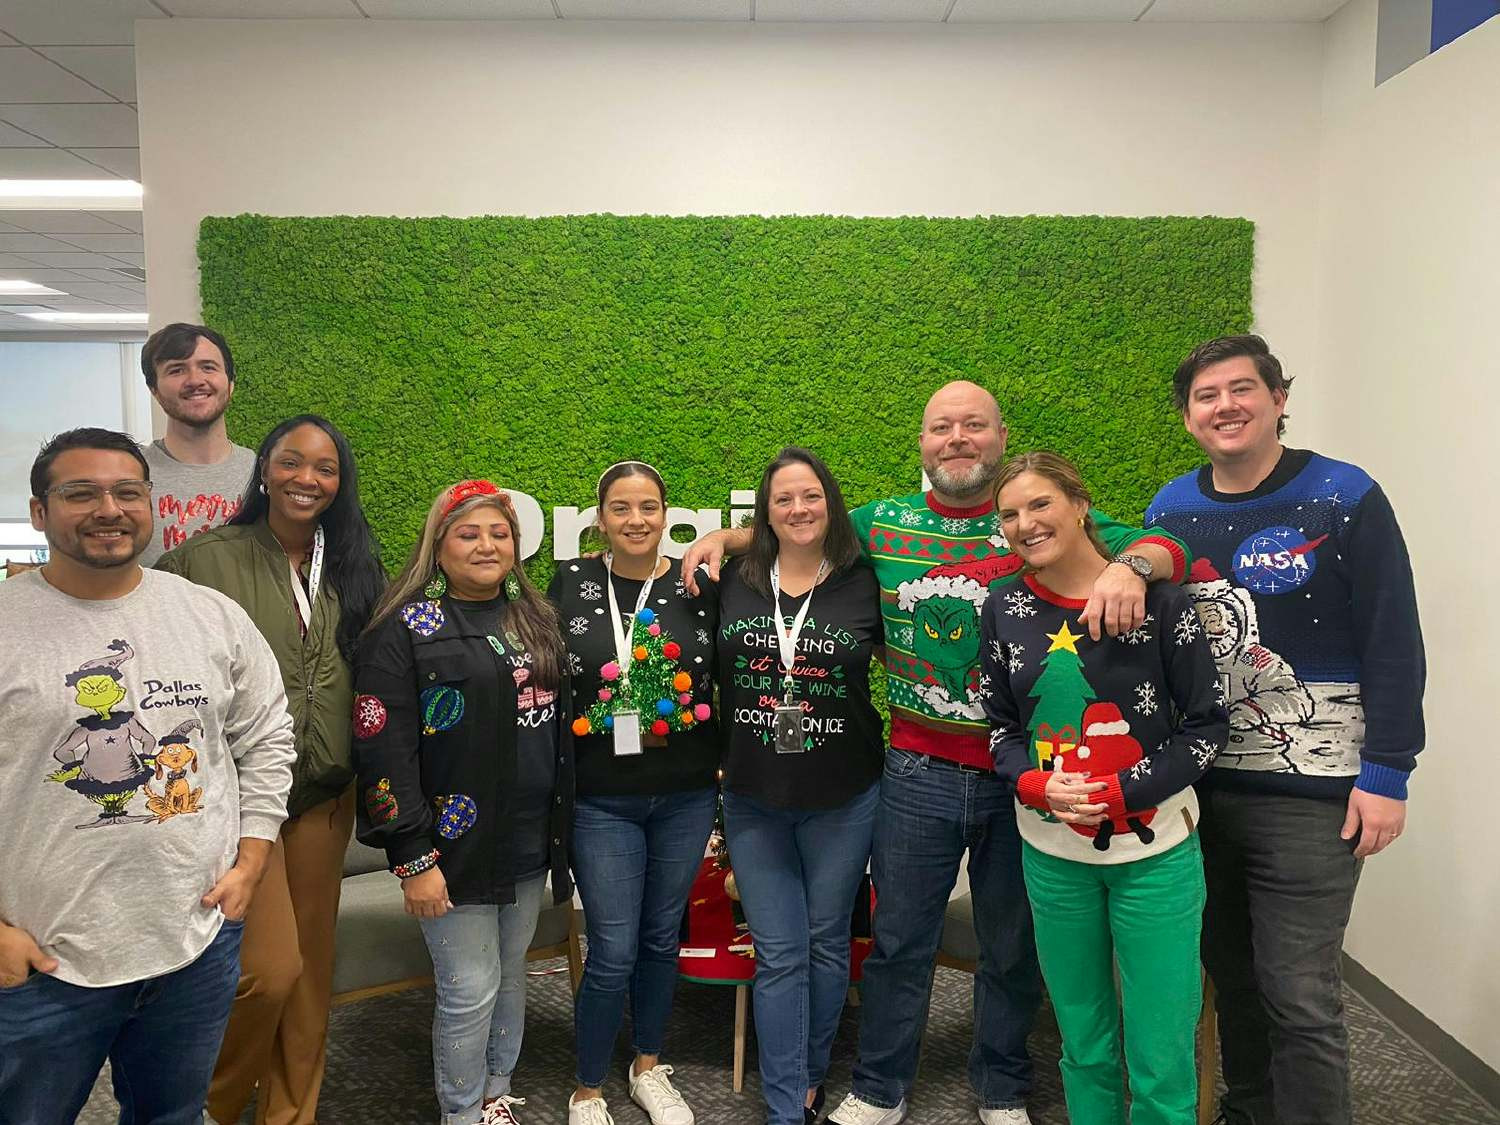 Ugly sweater day in the Plano office!